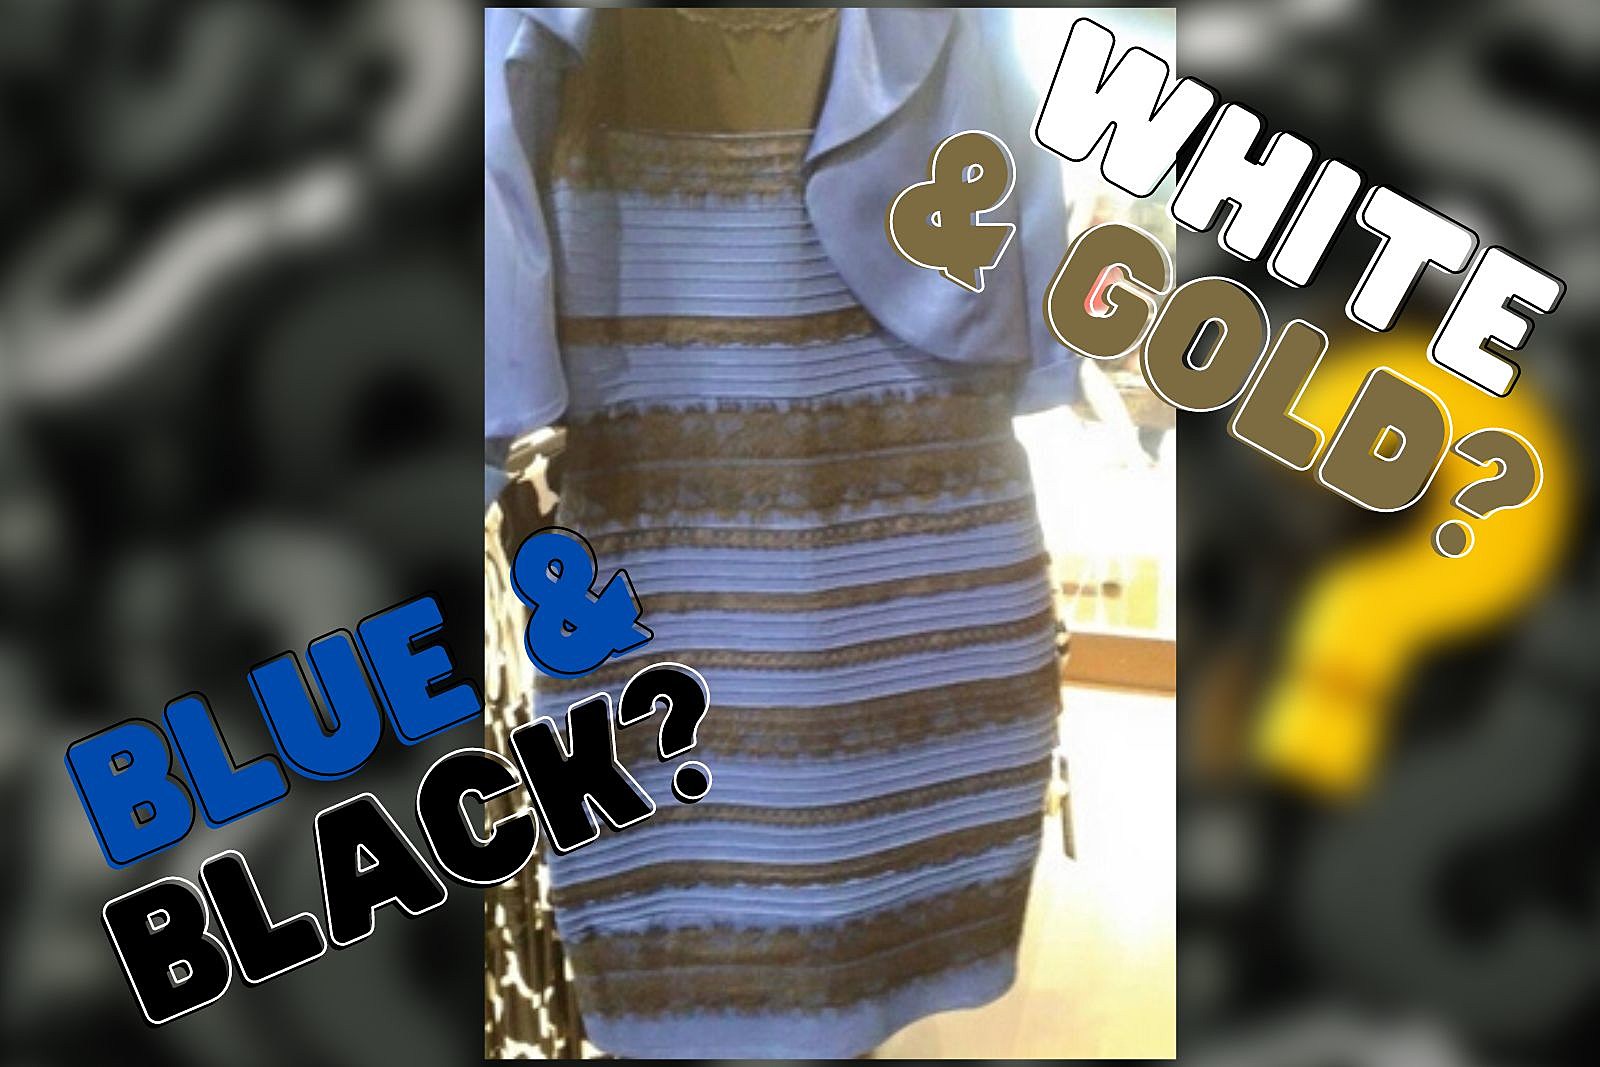 black and white dress or blue and gold